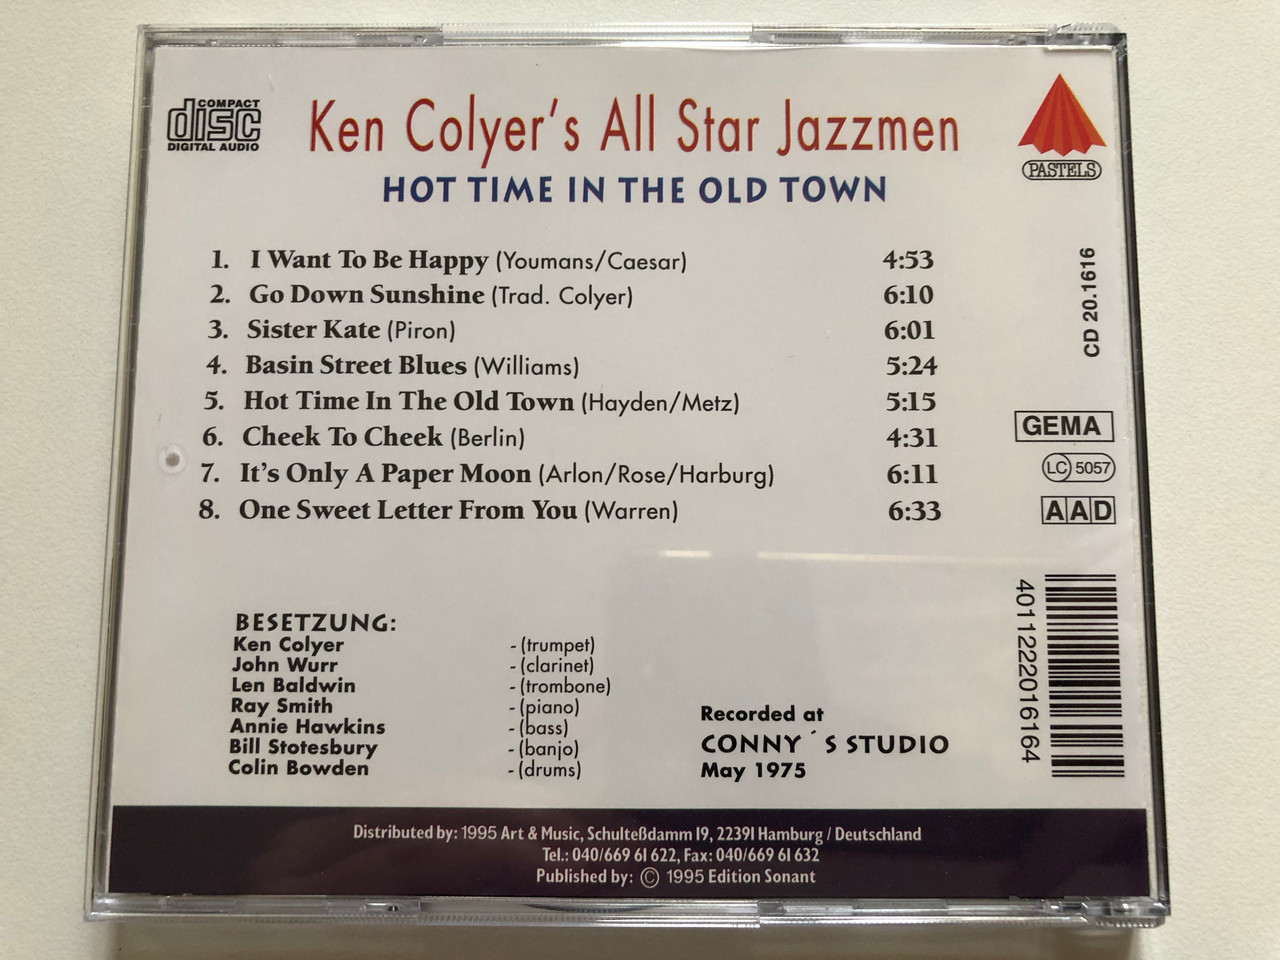 https://cdn10.bigcommerce.com/s-62bdpkt7pb/products/0/images/310799/Ken_Colyers_All_Star_Jazzmen_Hot_Time_In_The_Old_Town_I_Want_To_Be_Happy_Basin_Street_Blues_Cheek_To_Cheek_Sister_Kate_u._a._Pastels_Audio_CD_1995_20_2__72659.1699455161.1280.1280.JPG?c=2